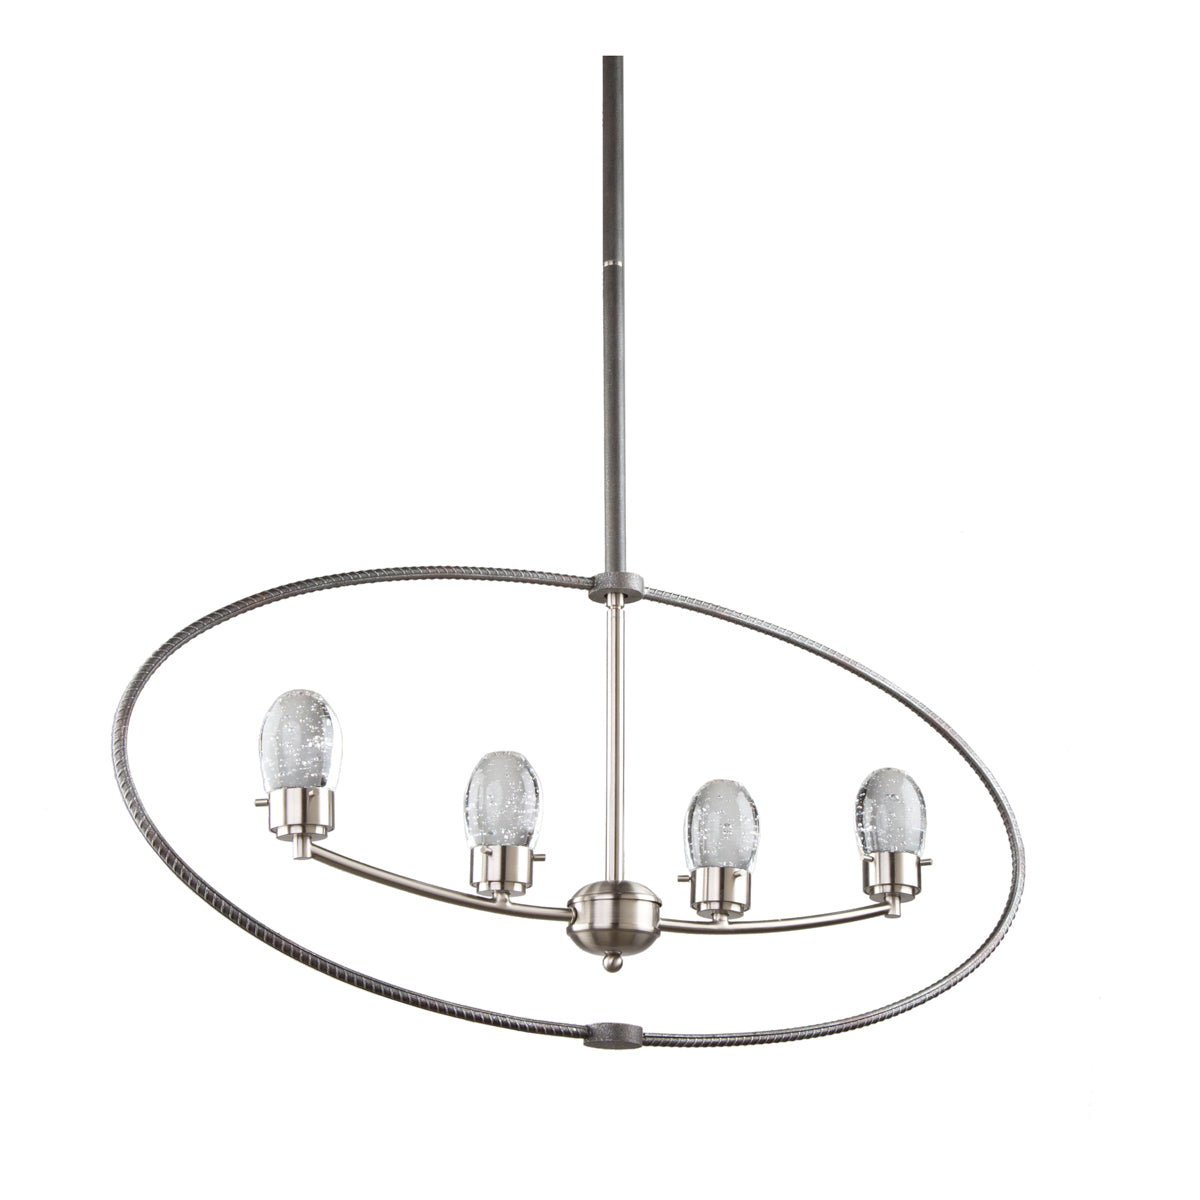 Artcraft LED Chandelier from the Kingsford collection in Slate & brushed nickel finish